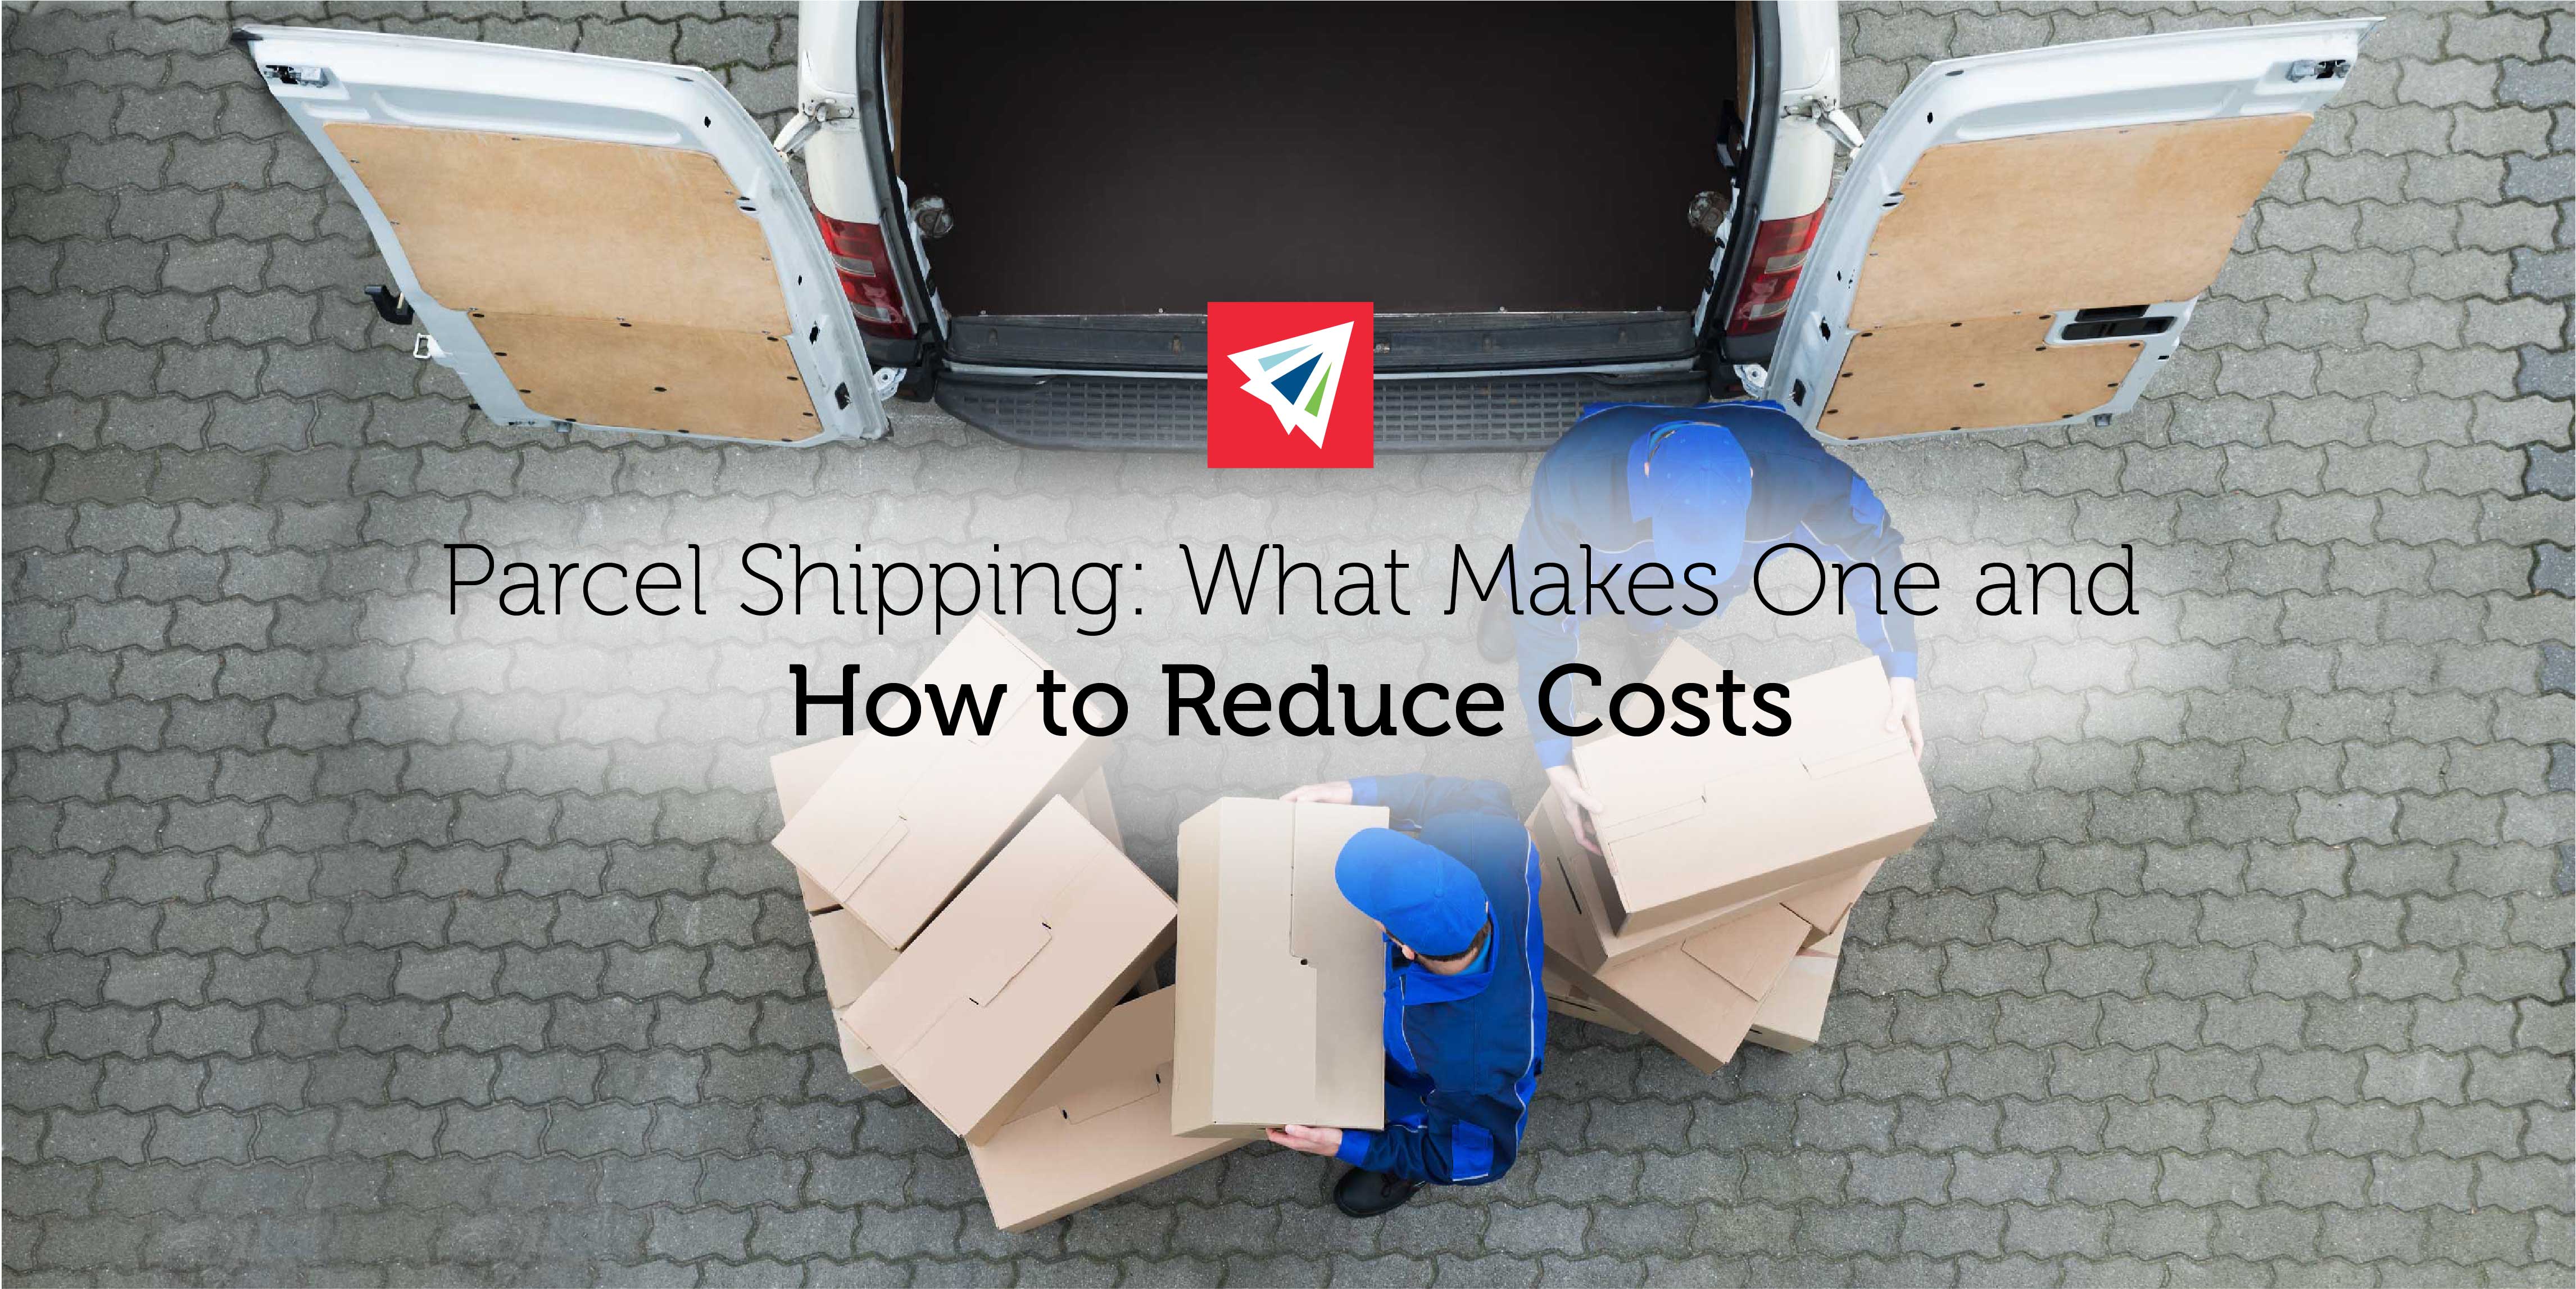 Parcel Shipping: What Makes One and How To Reduce Costs